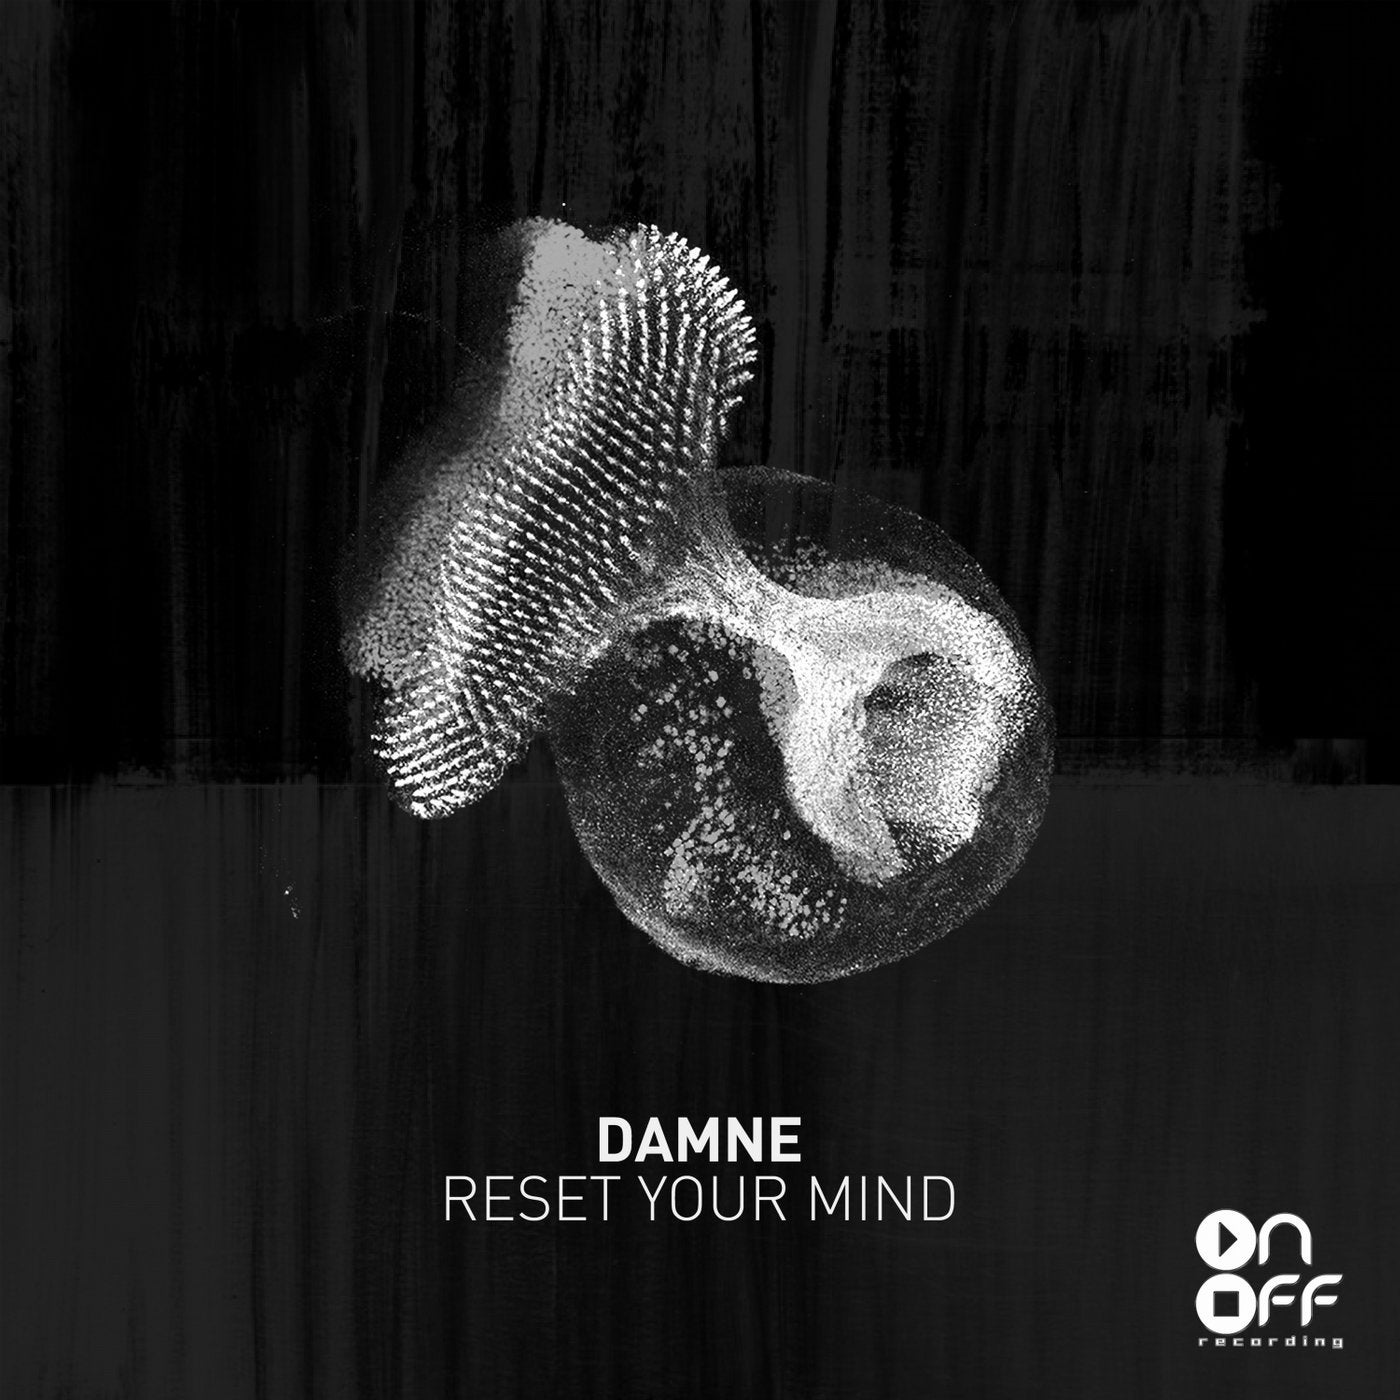 Reset Your Mind